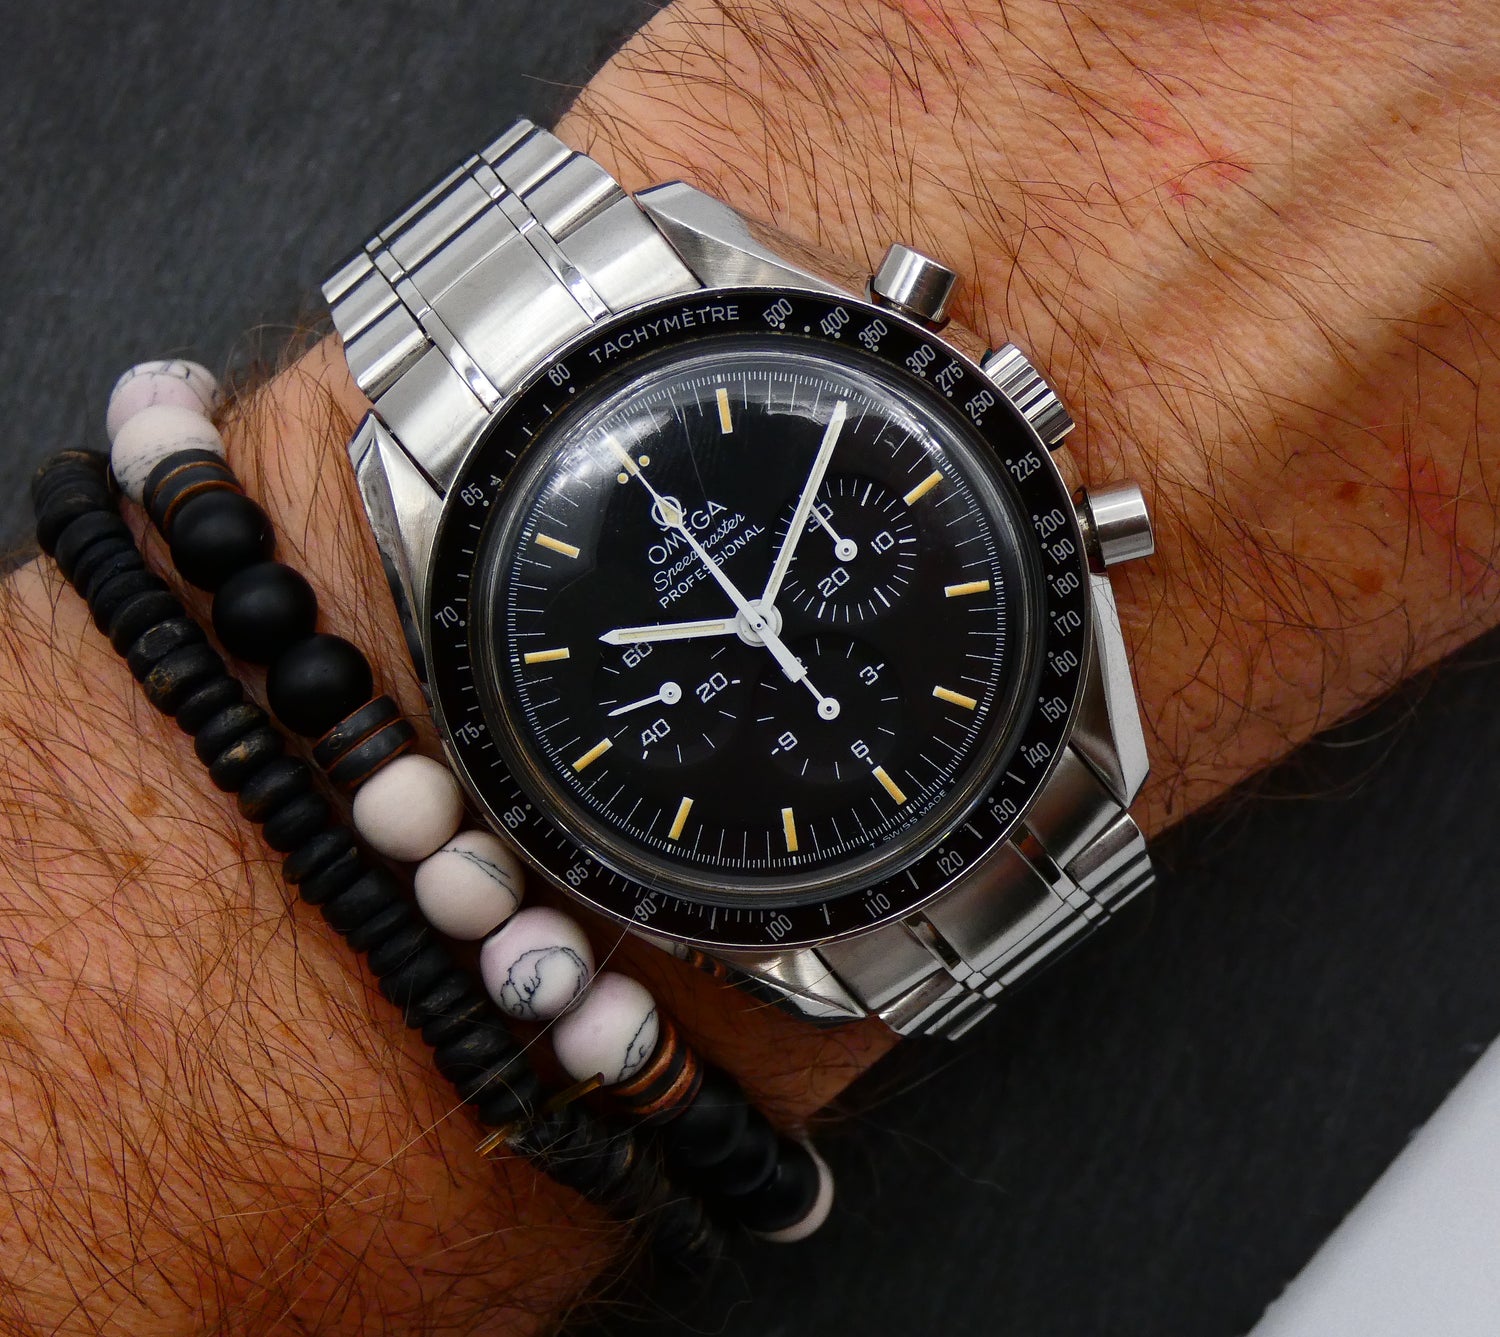 SOLDOUT Omega Speedmaster Professional Moonwatch 145.022